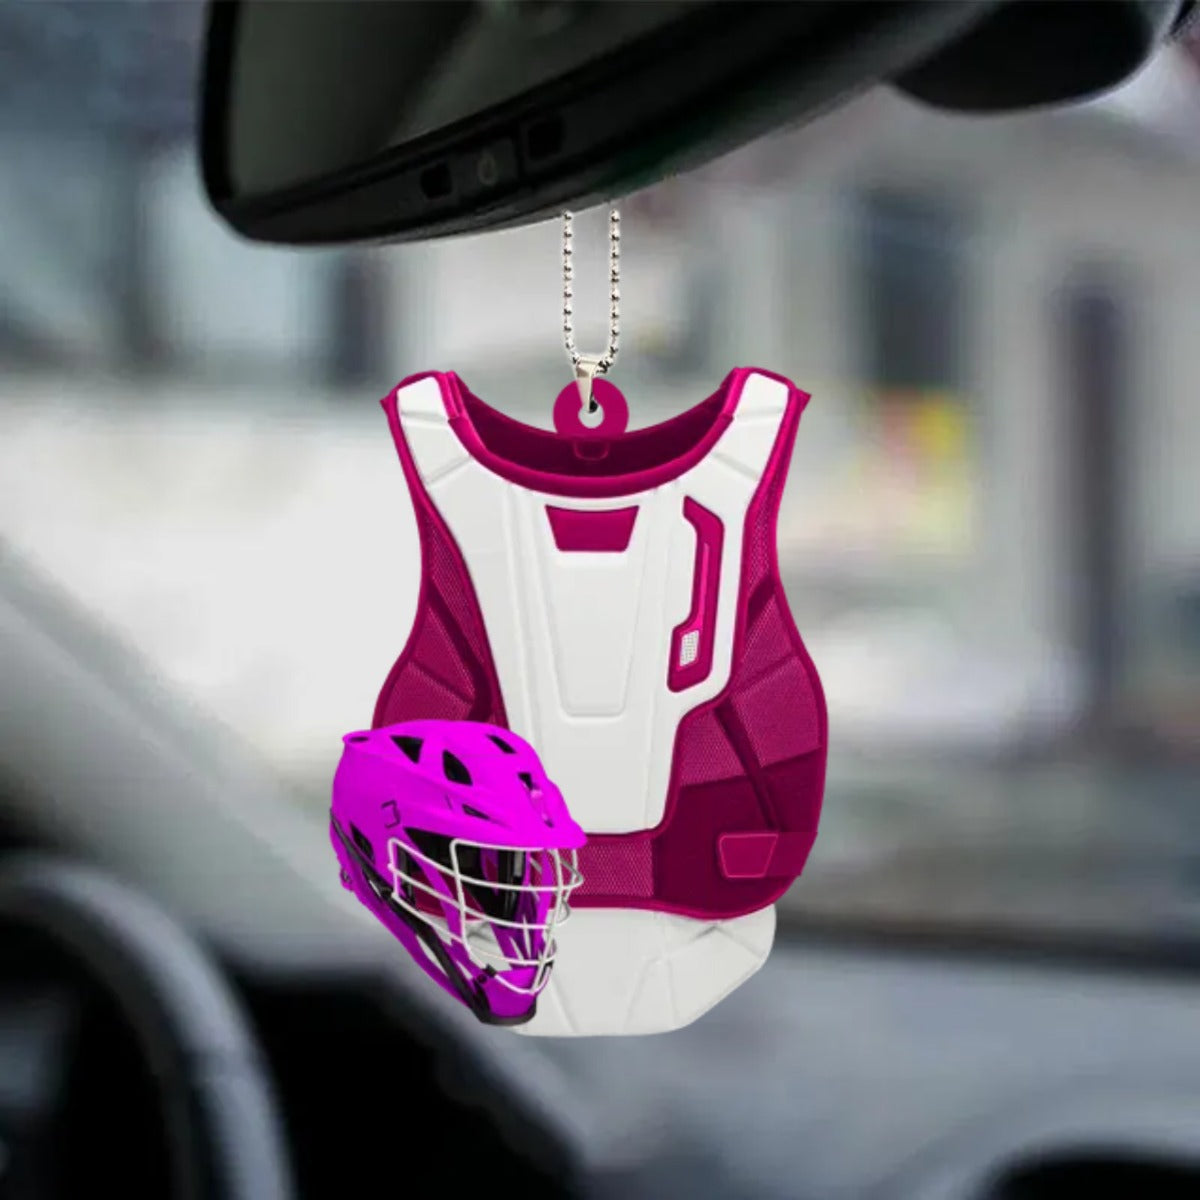 Personalized Lacrosse Uniform And Helmet Flat Acrylic Car Hanging Ornament/ Gift for Lacrosse Players